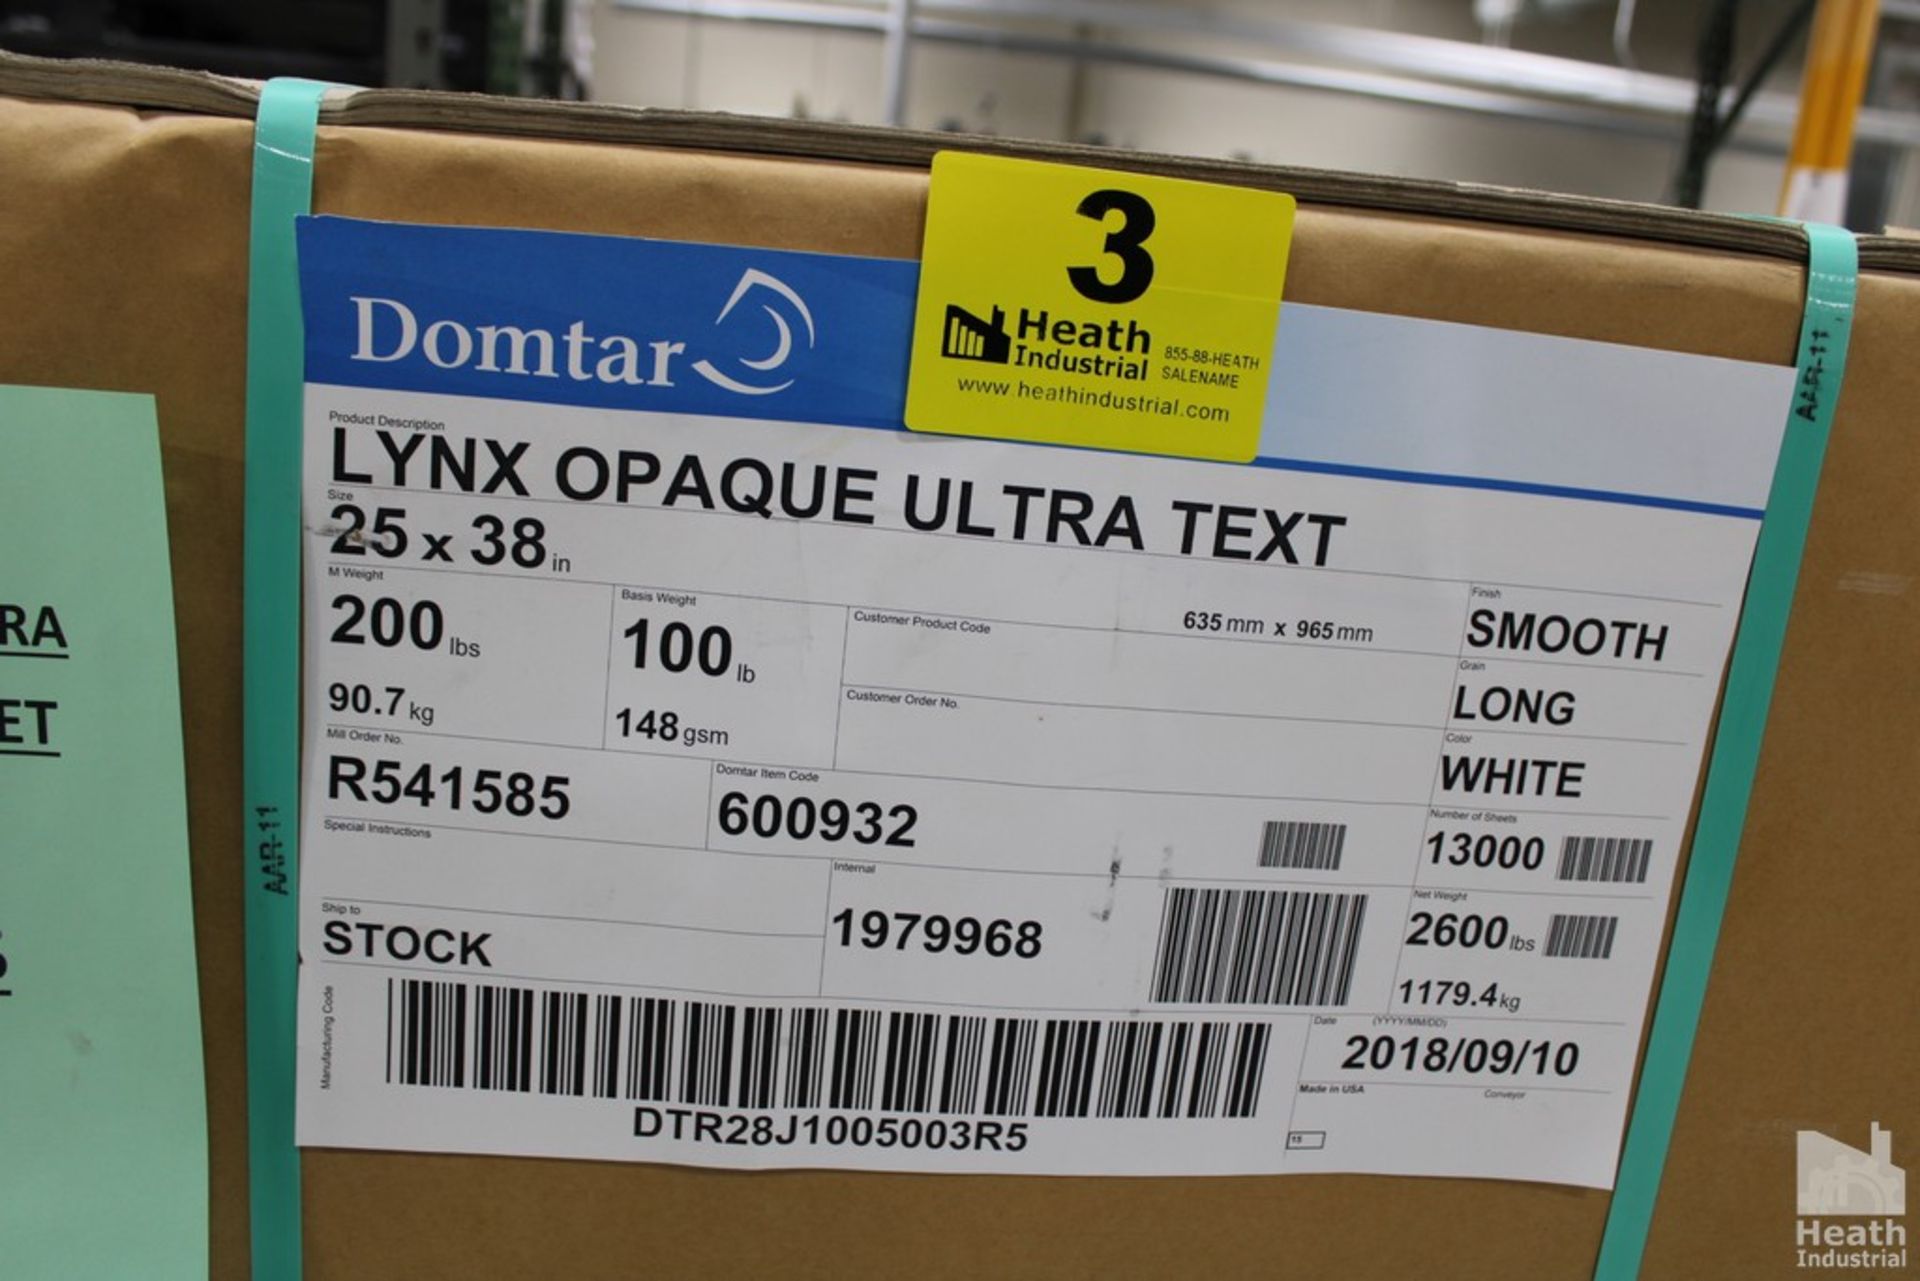 (1) SKID DOMTAR 25" X 38" LYNX OPAQUE ULTRA TEXT PAPER 13,000 SHEETS (SEALED) - Image 2 of 2